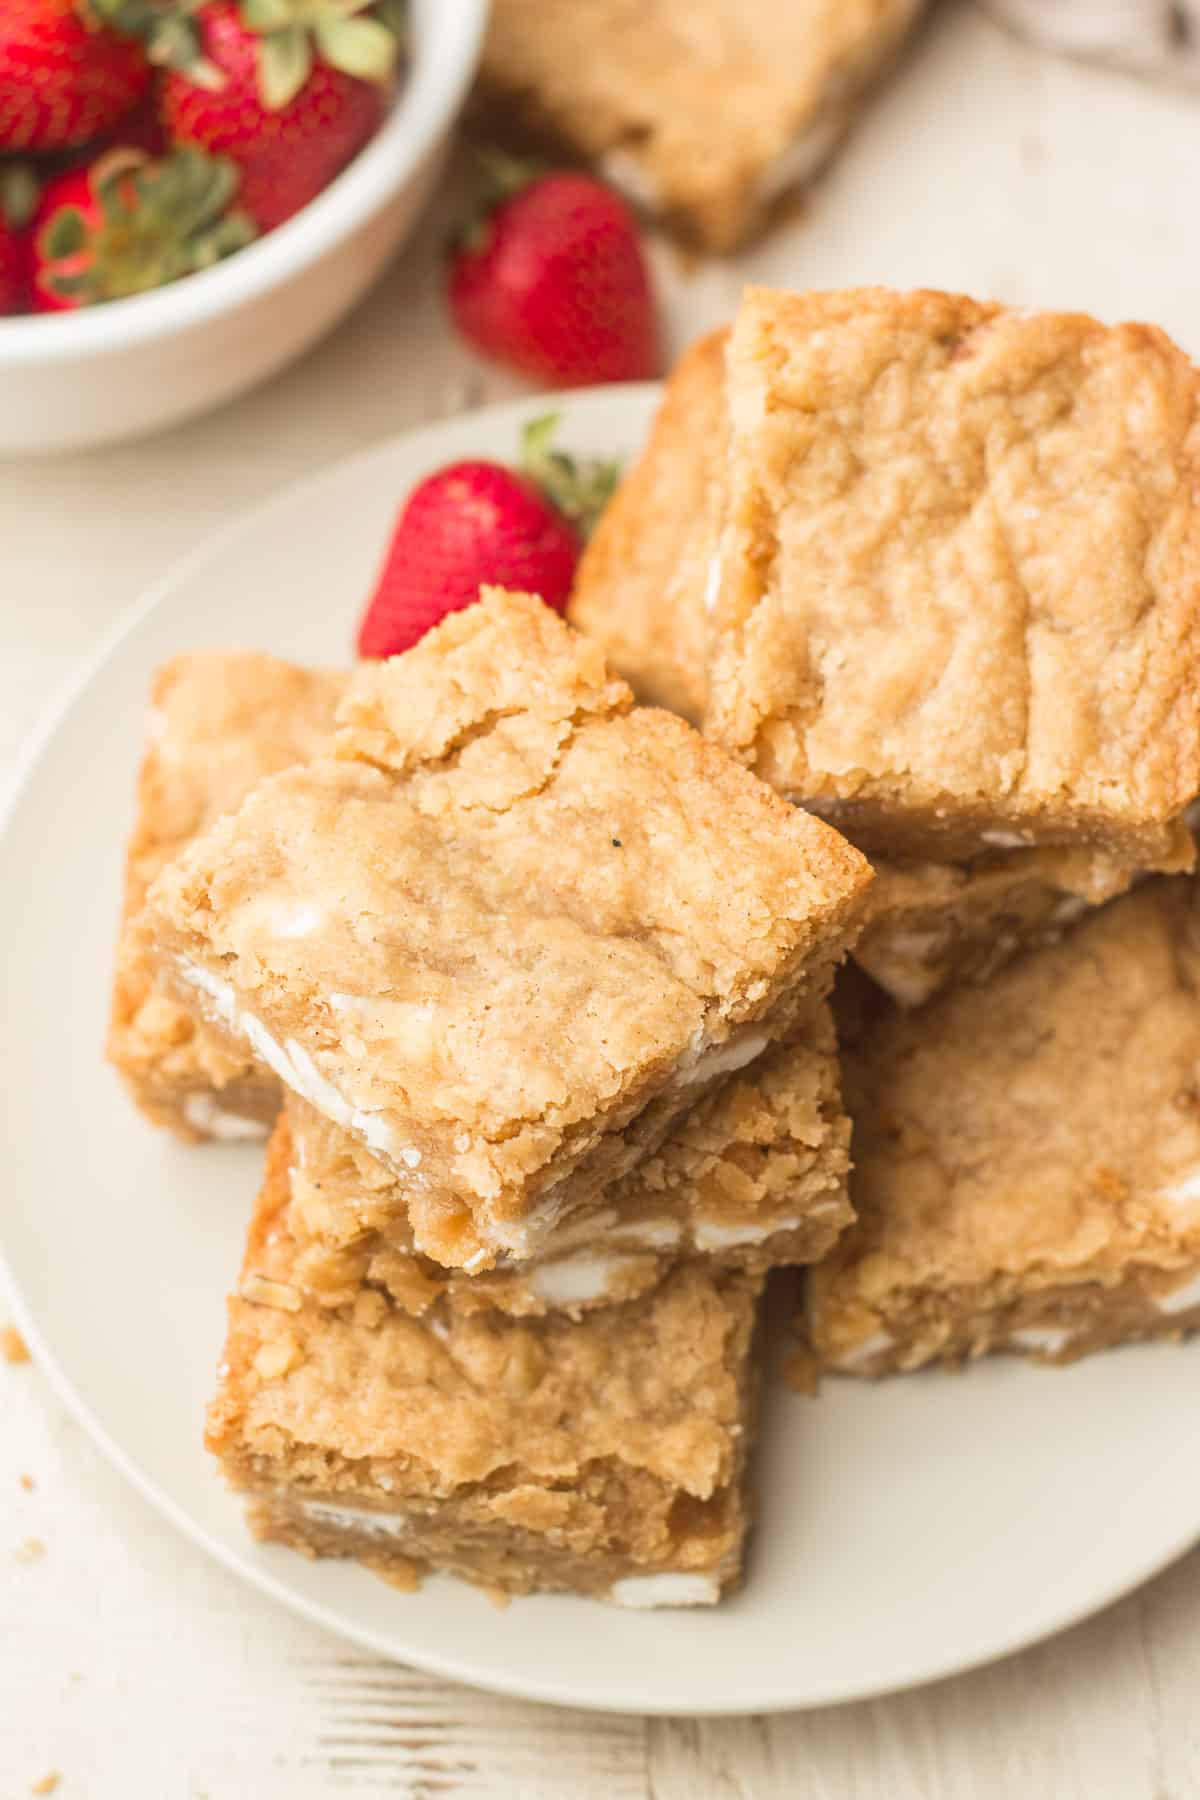 Plate of vegan blondies and strawberries, with a bowl of strawberries in the background